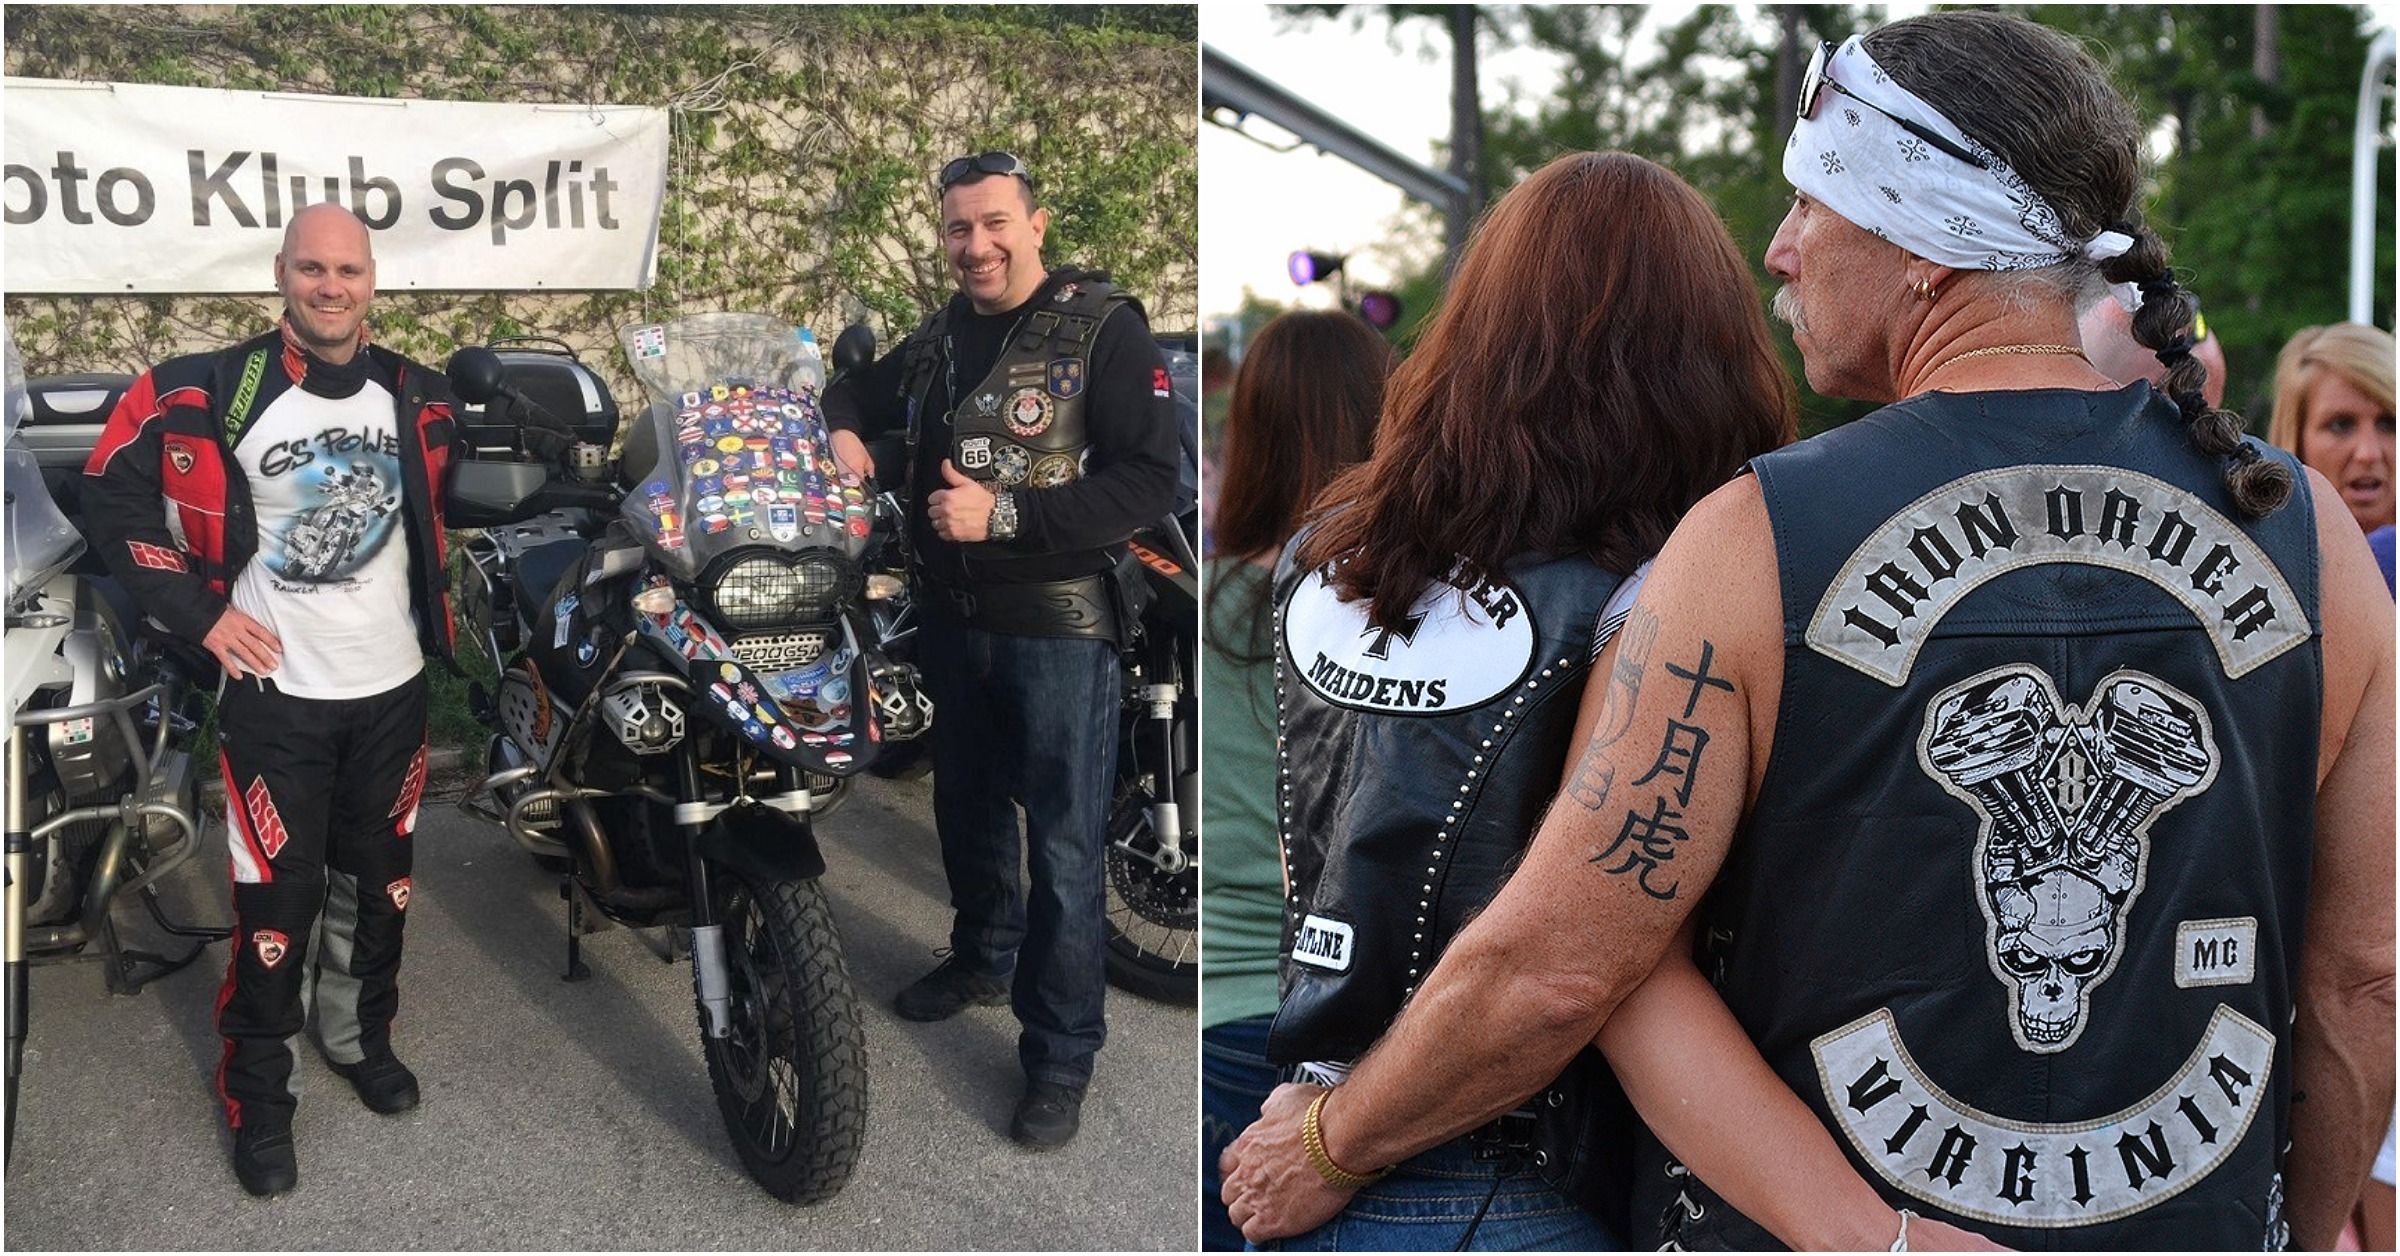 15 Friendliest Motorcycle Clubs We Want To Join | HotCars